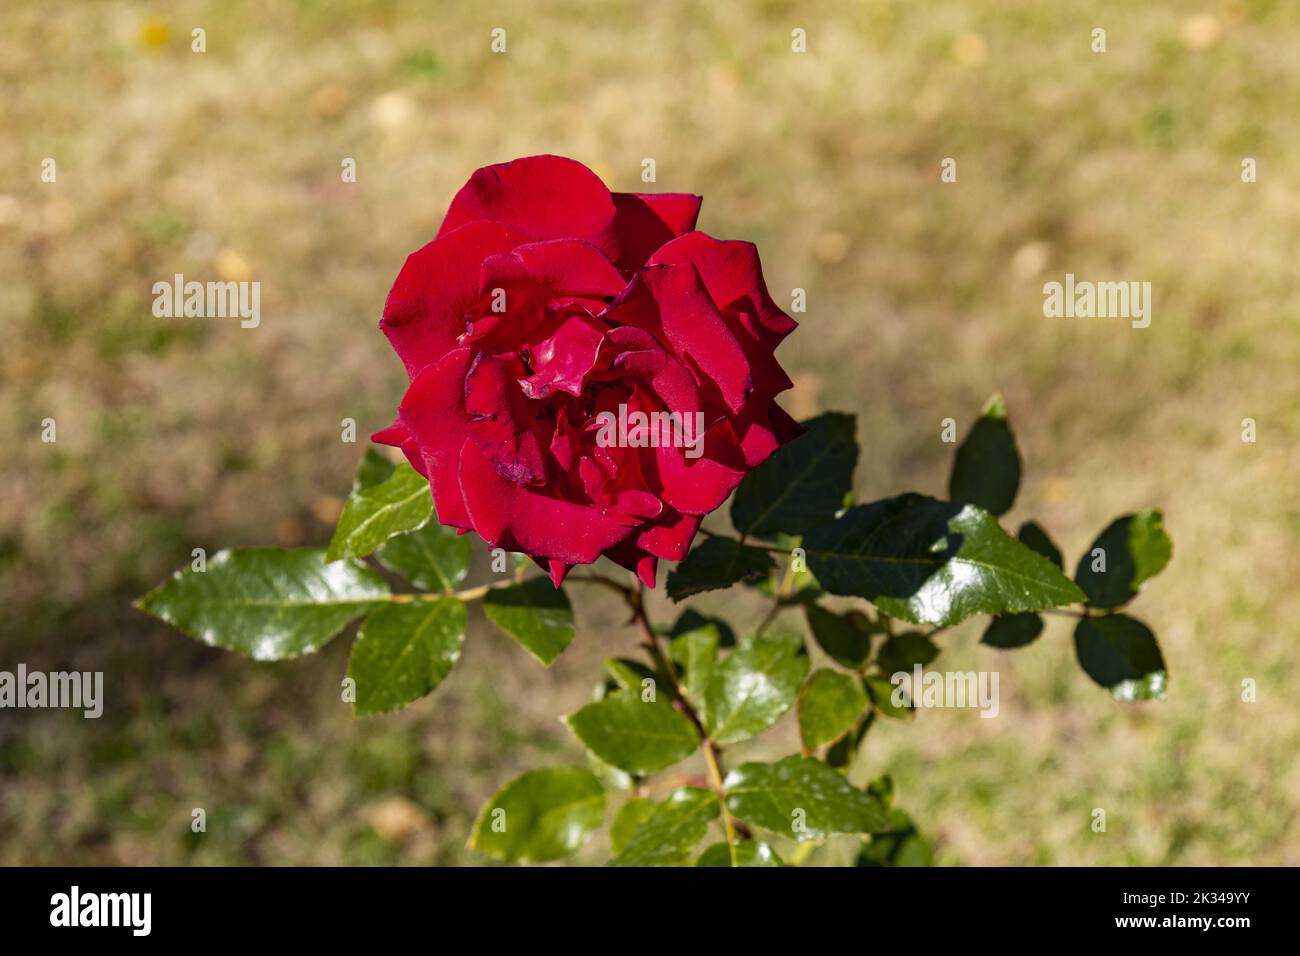 Scarlet lonely rose in the rays of the daytime sun. Stock Photo